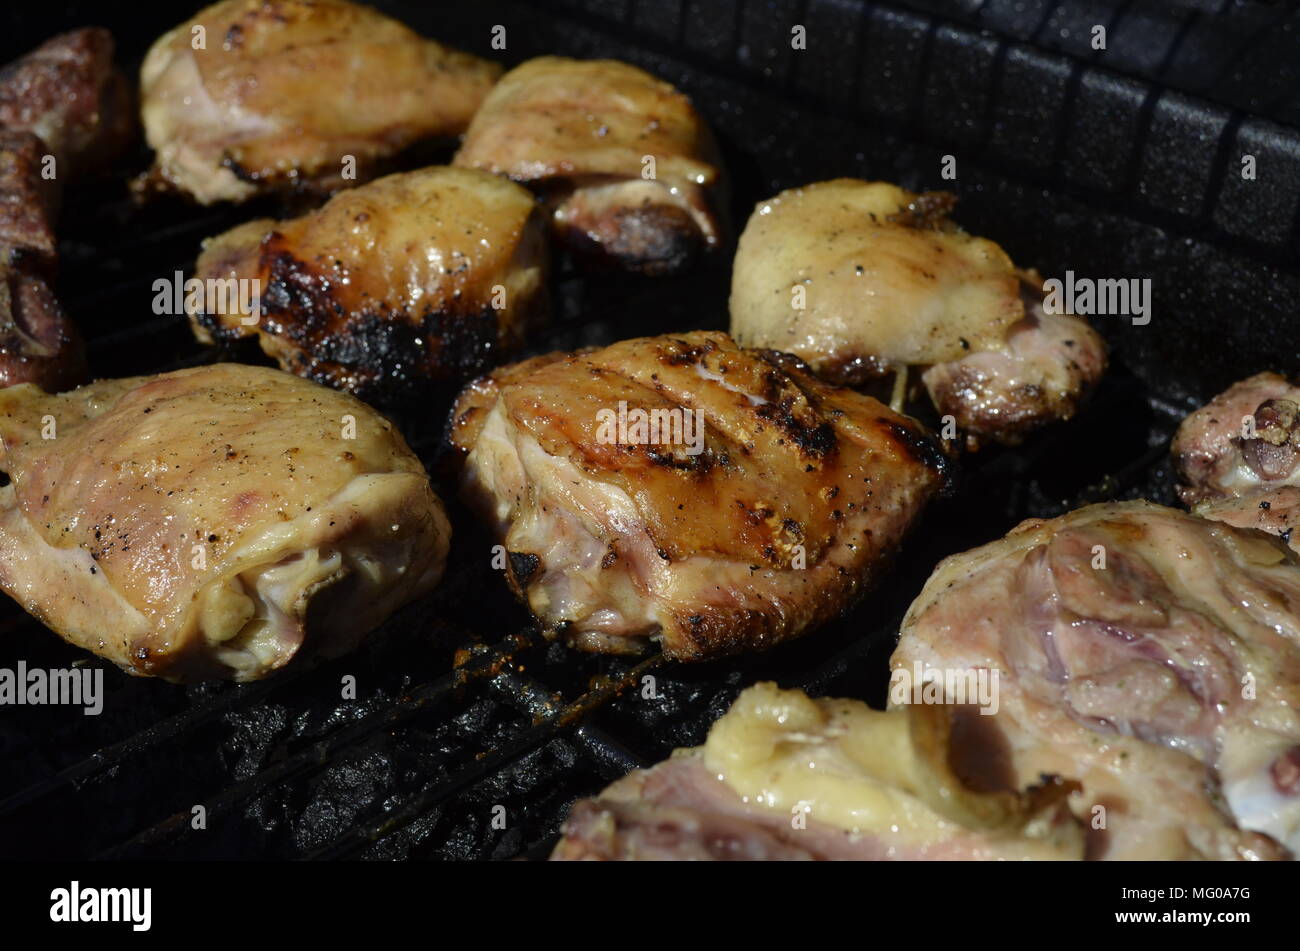 Fresh and juicy Chicken Thighs cooking on the outdoor backyard BBQ grill Stock Photo